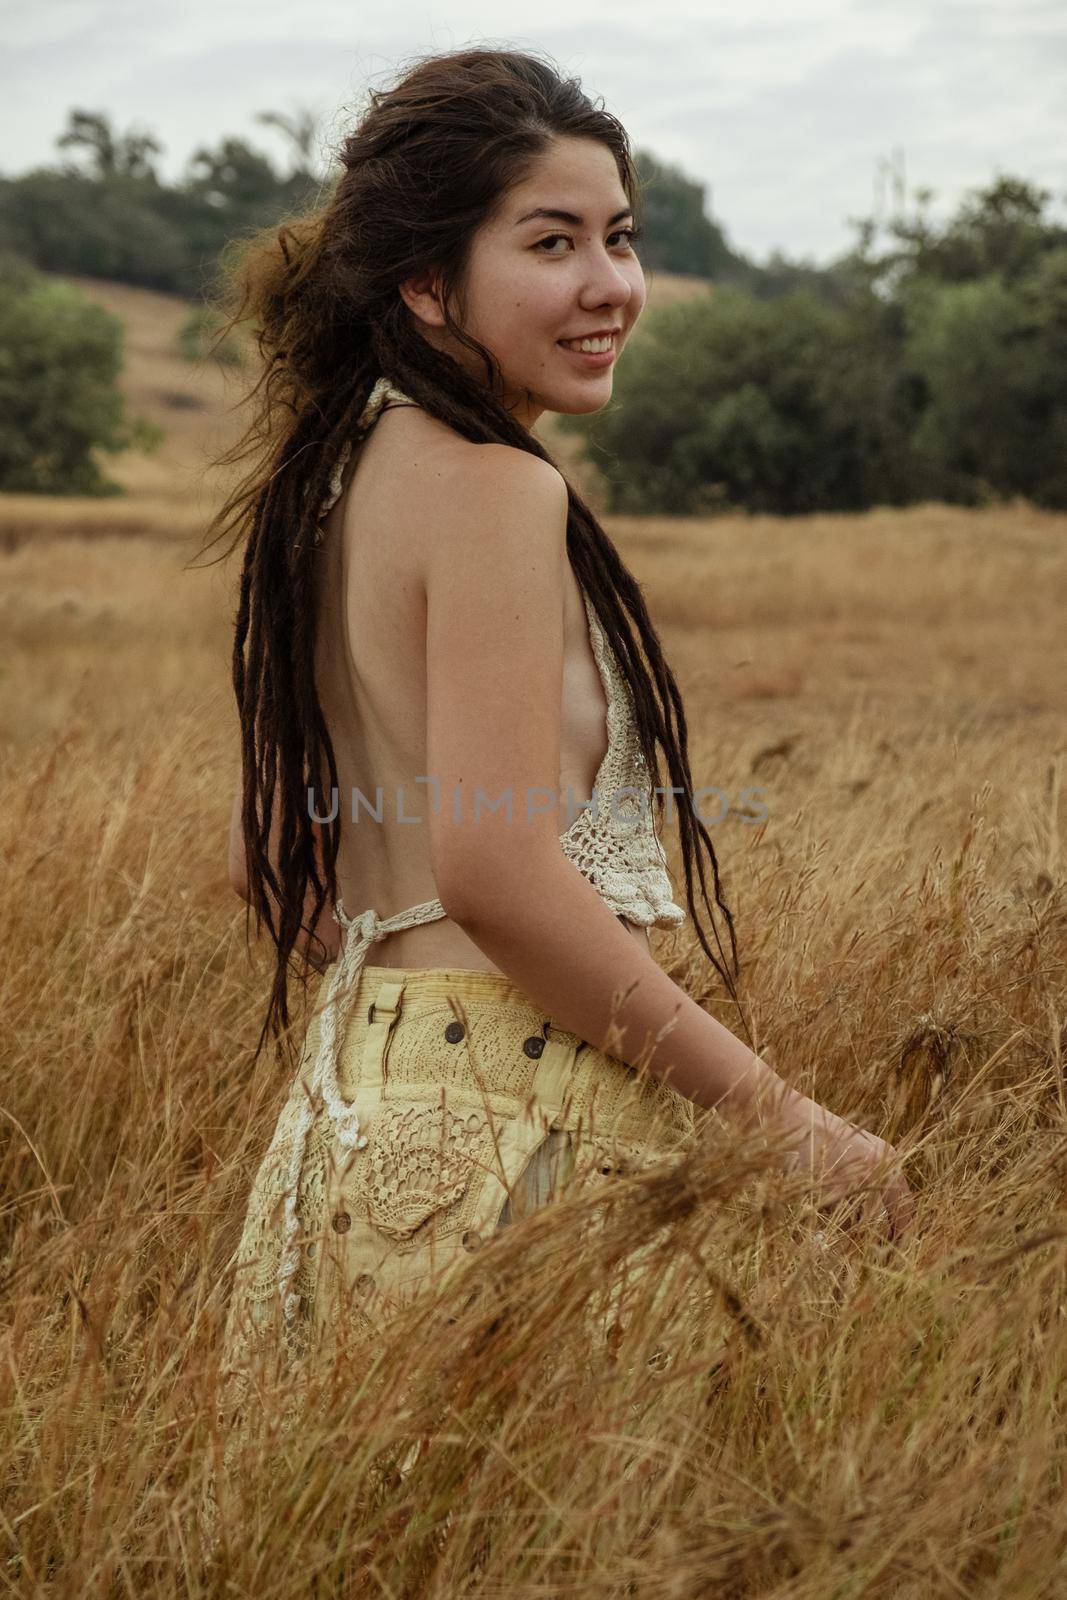 Portrait Of Smiling Young Woman Standing On Dry Grass